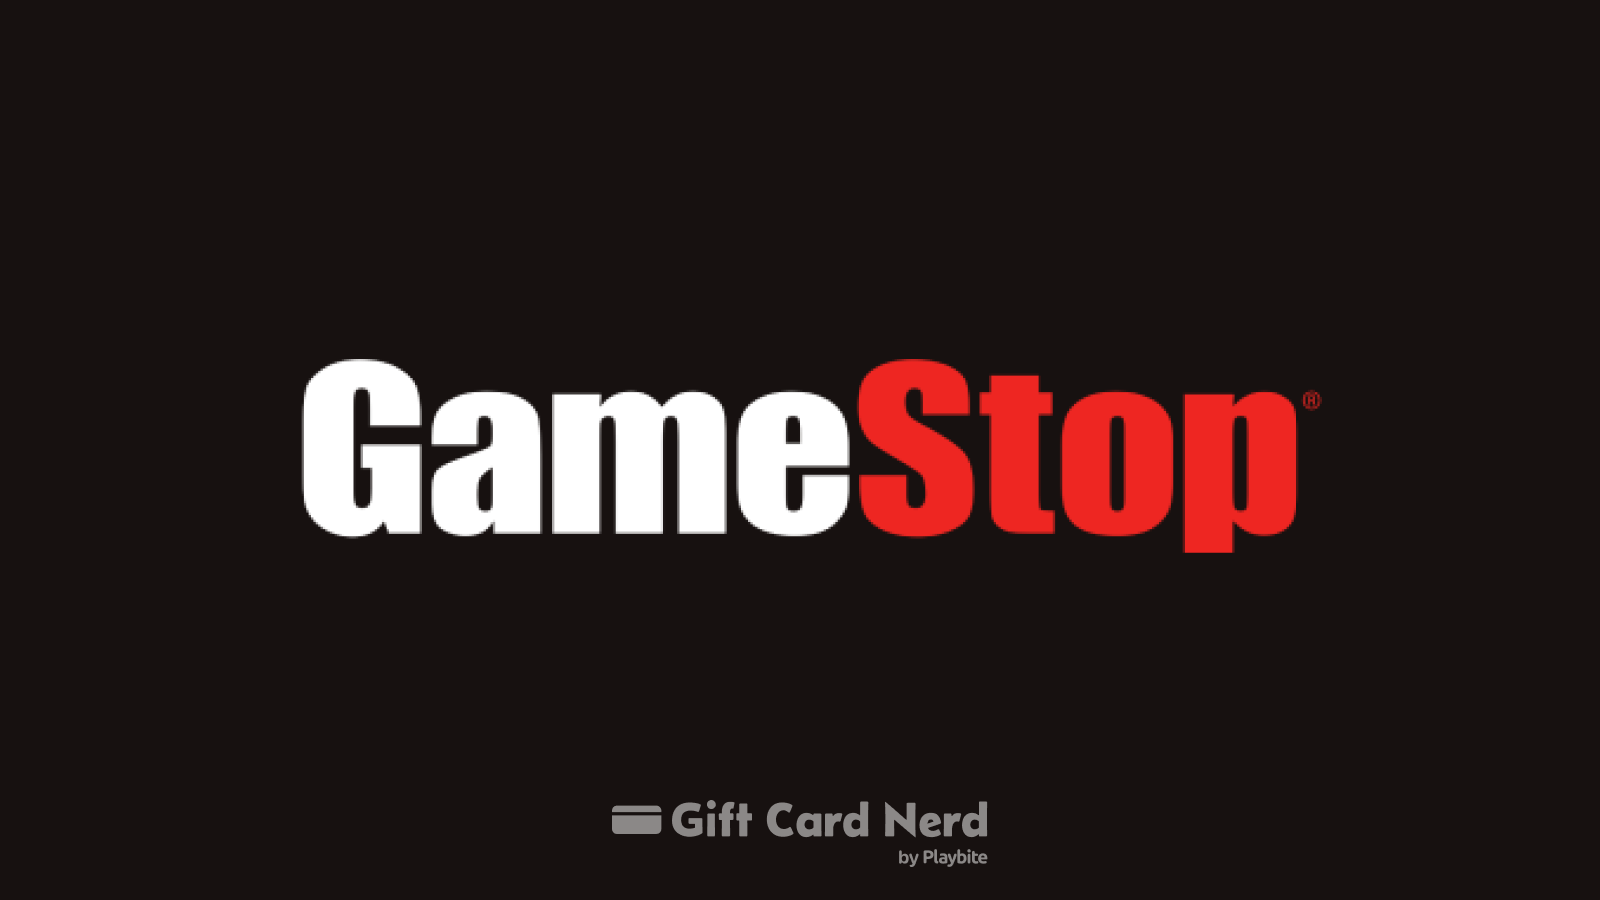 Can I Use a GameStop Gift Card on Postmates?